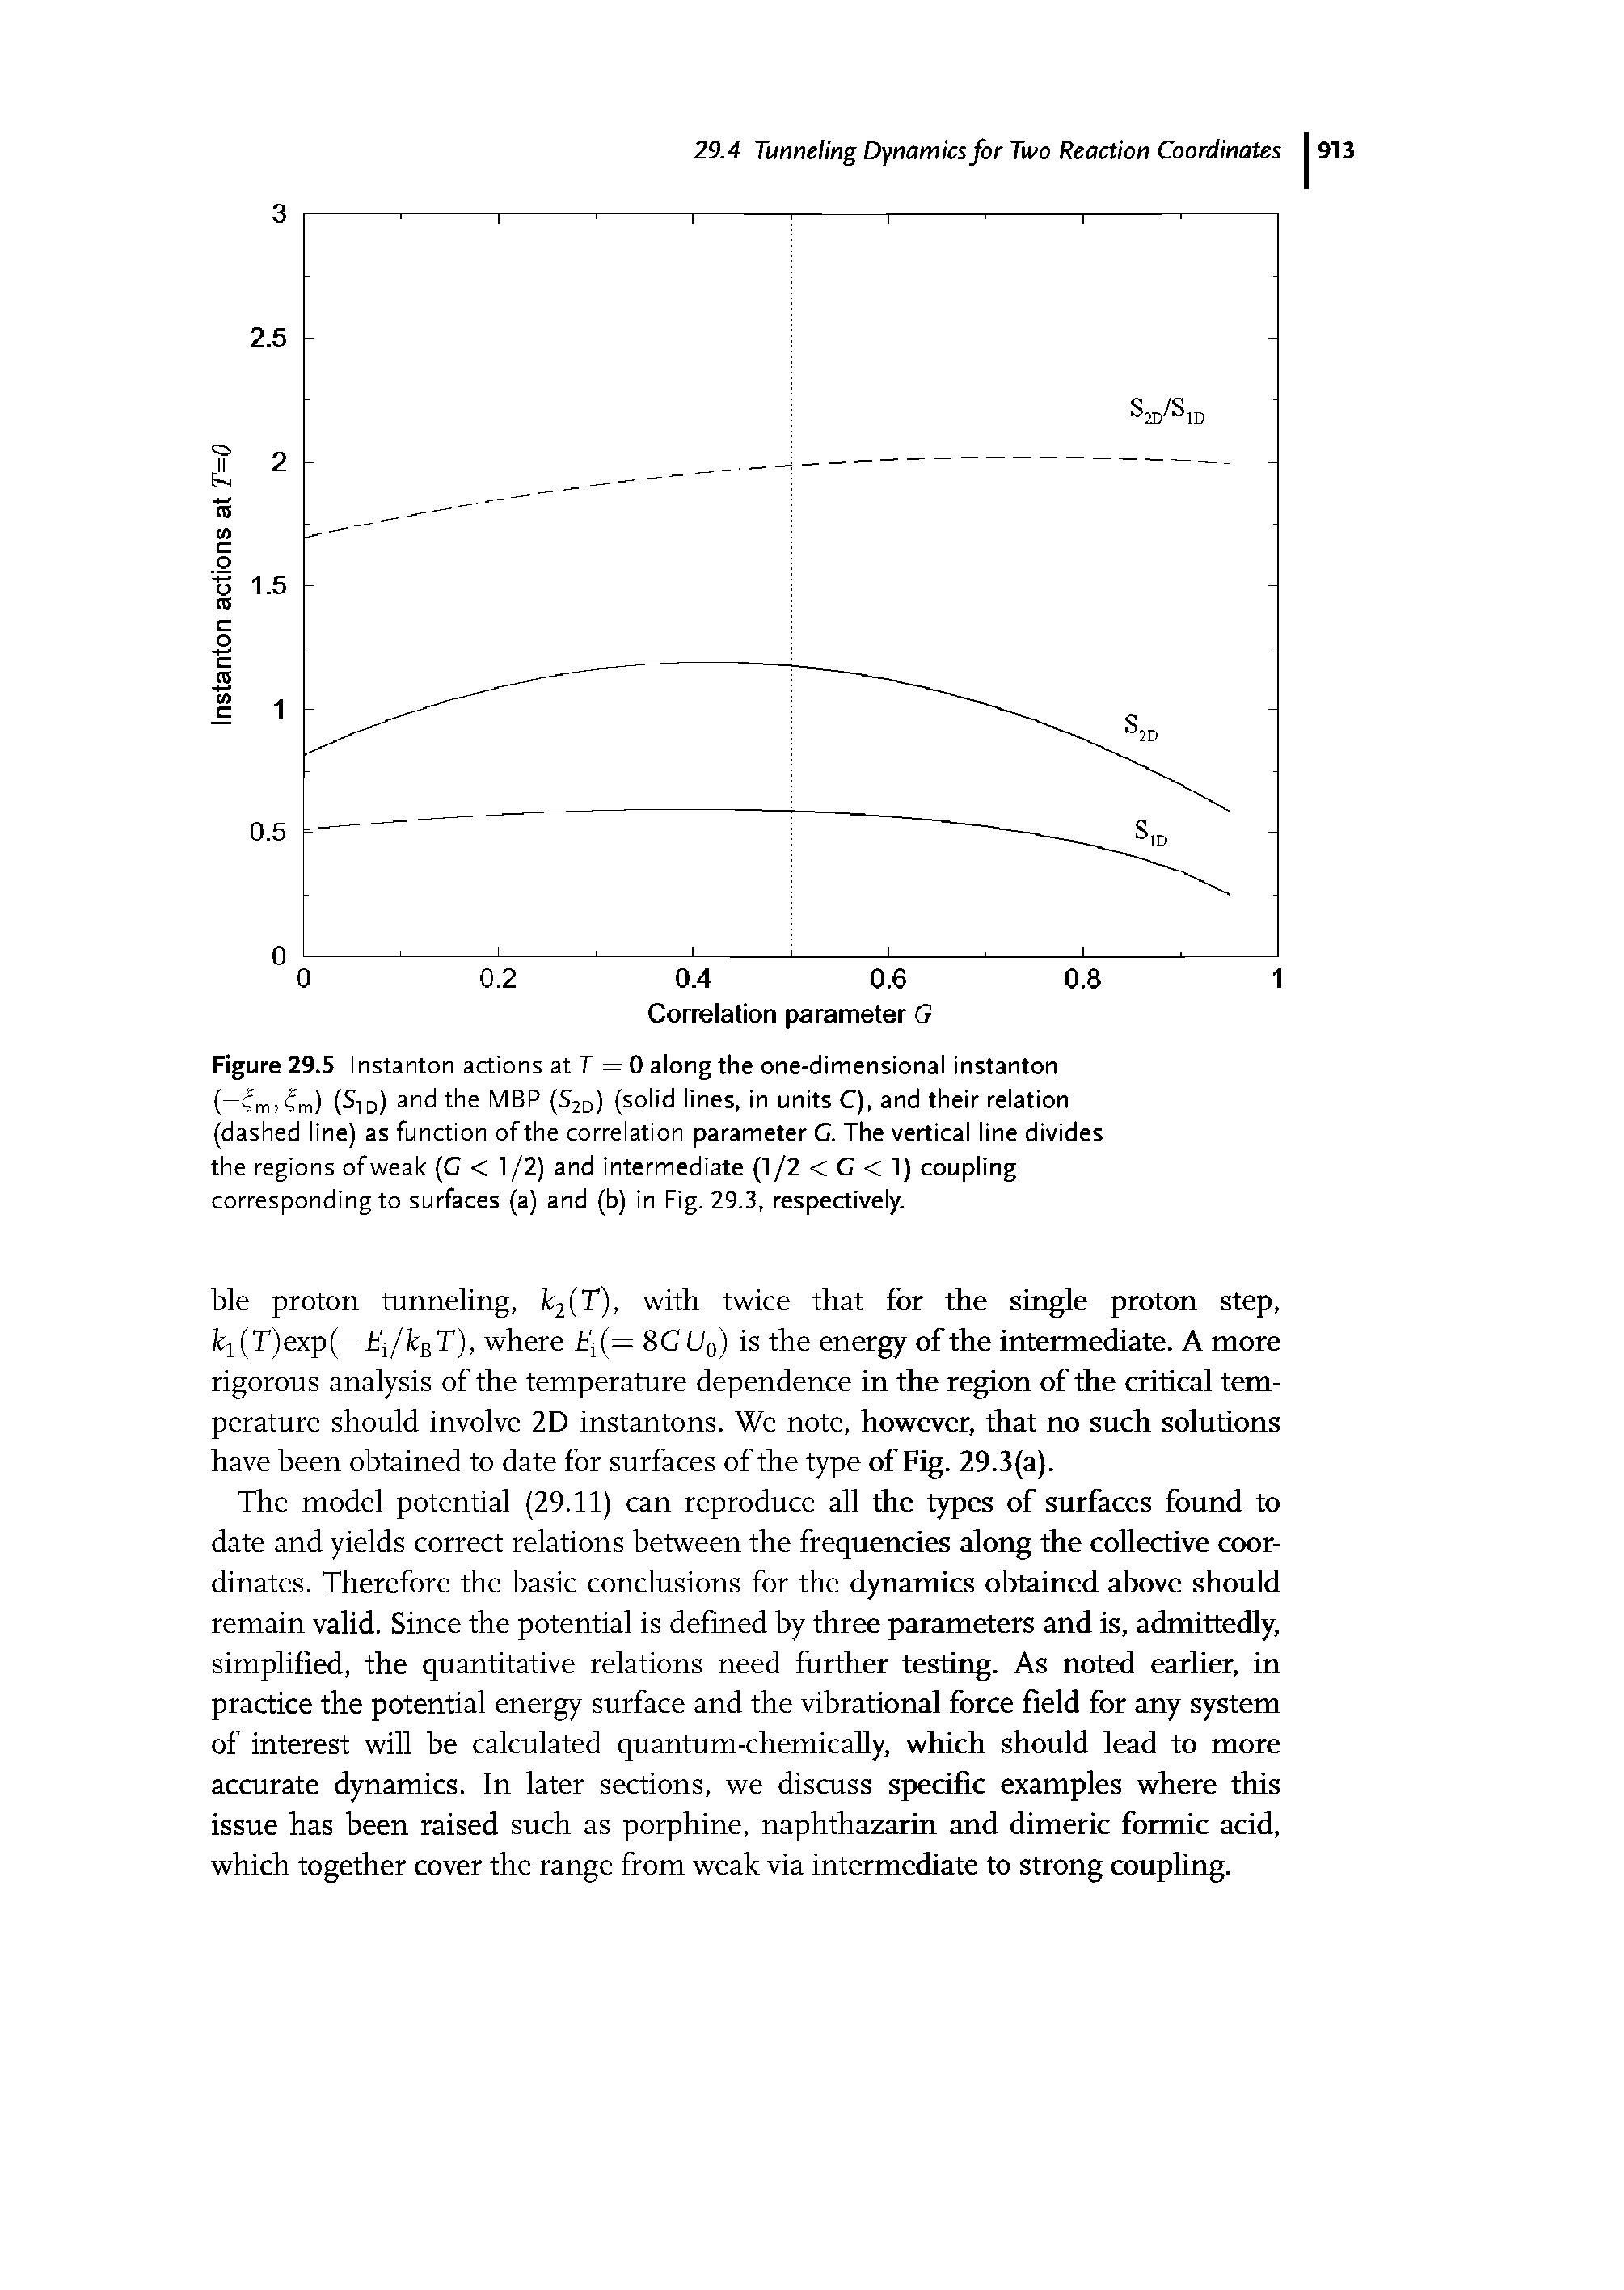 Figure 29.5 Instanton actions at 7 = 0 along the one-dimensional instanton (—( 1 ) and the MBP (S2o) (solid lines, in units C), and their relation (dashed line) as function of the correlation parameter C. The vertical line divides the regions ofweak (C < 1 /2) and intermediate (1/2 < C < 1) coupling corresponding to surfaces (a) and (b) in Fig. 29.3, respectively.